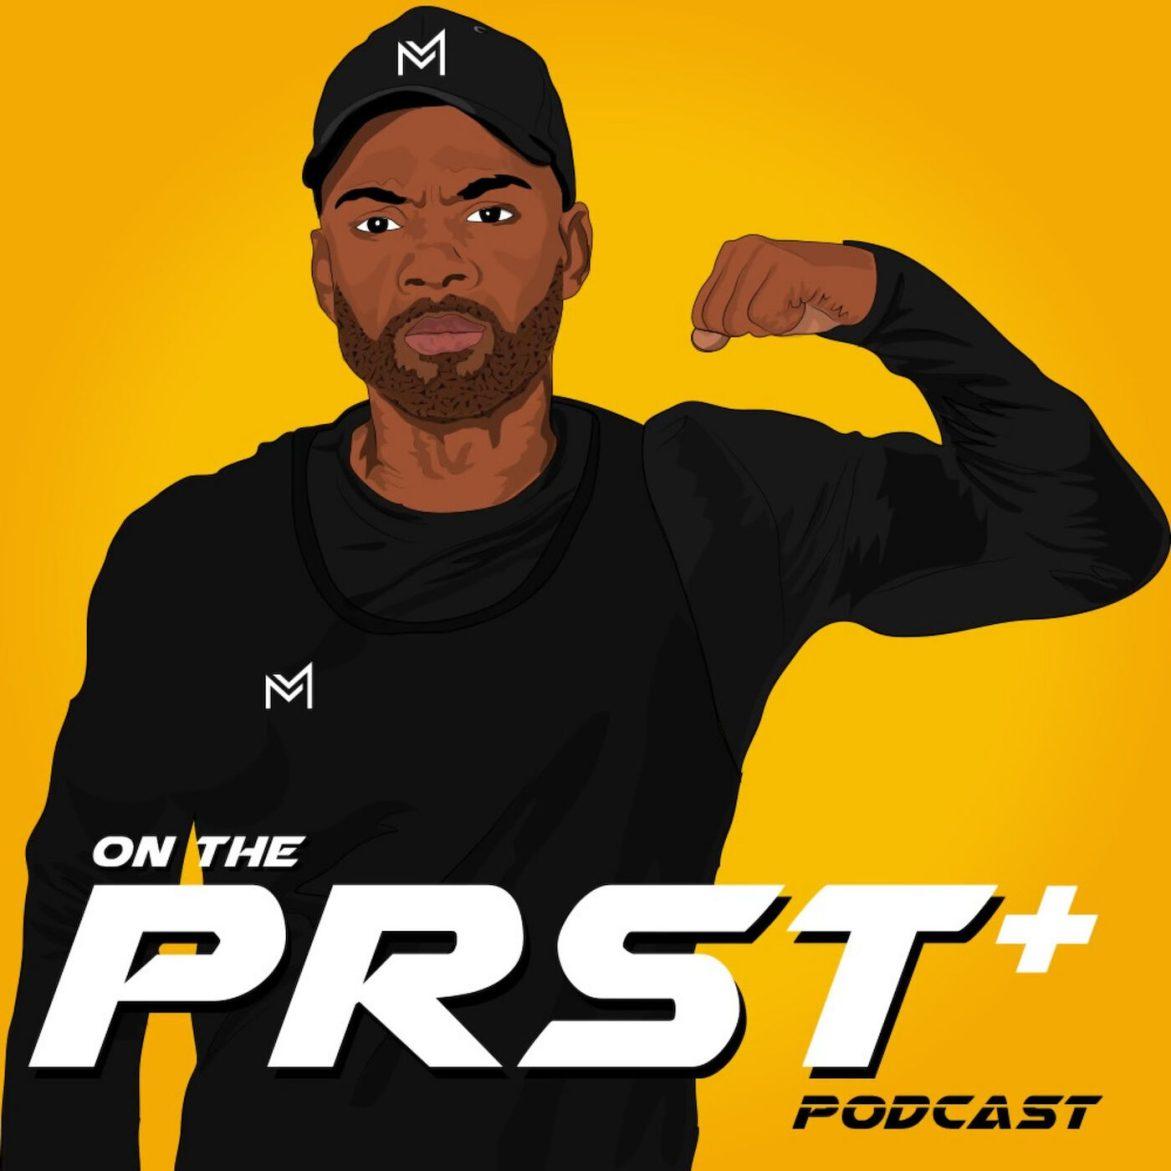 Black Podcasting - Exposing Wes Watson: Real Messages For Modern Men